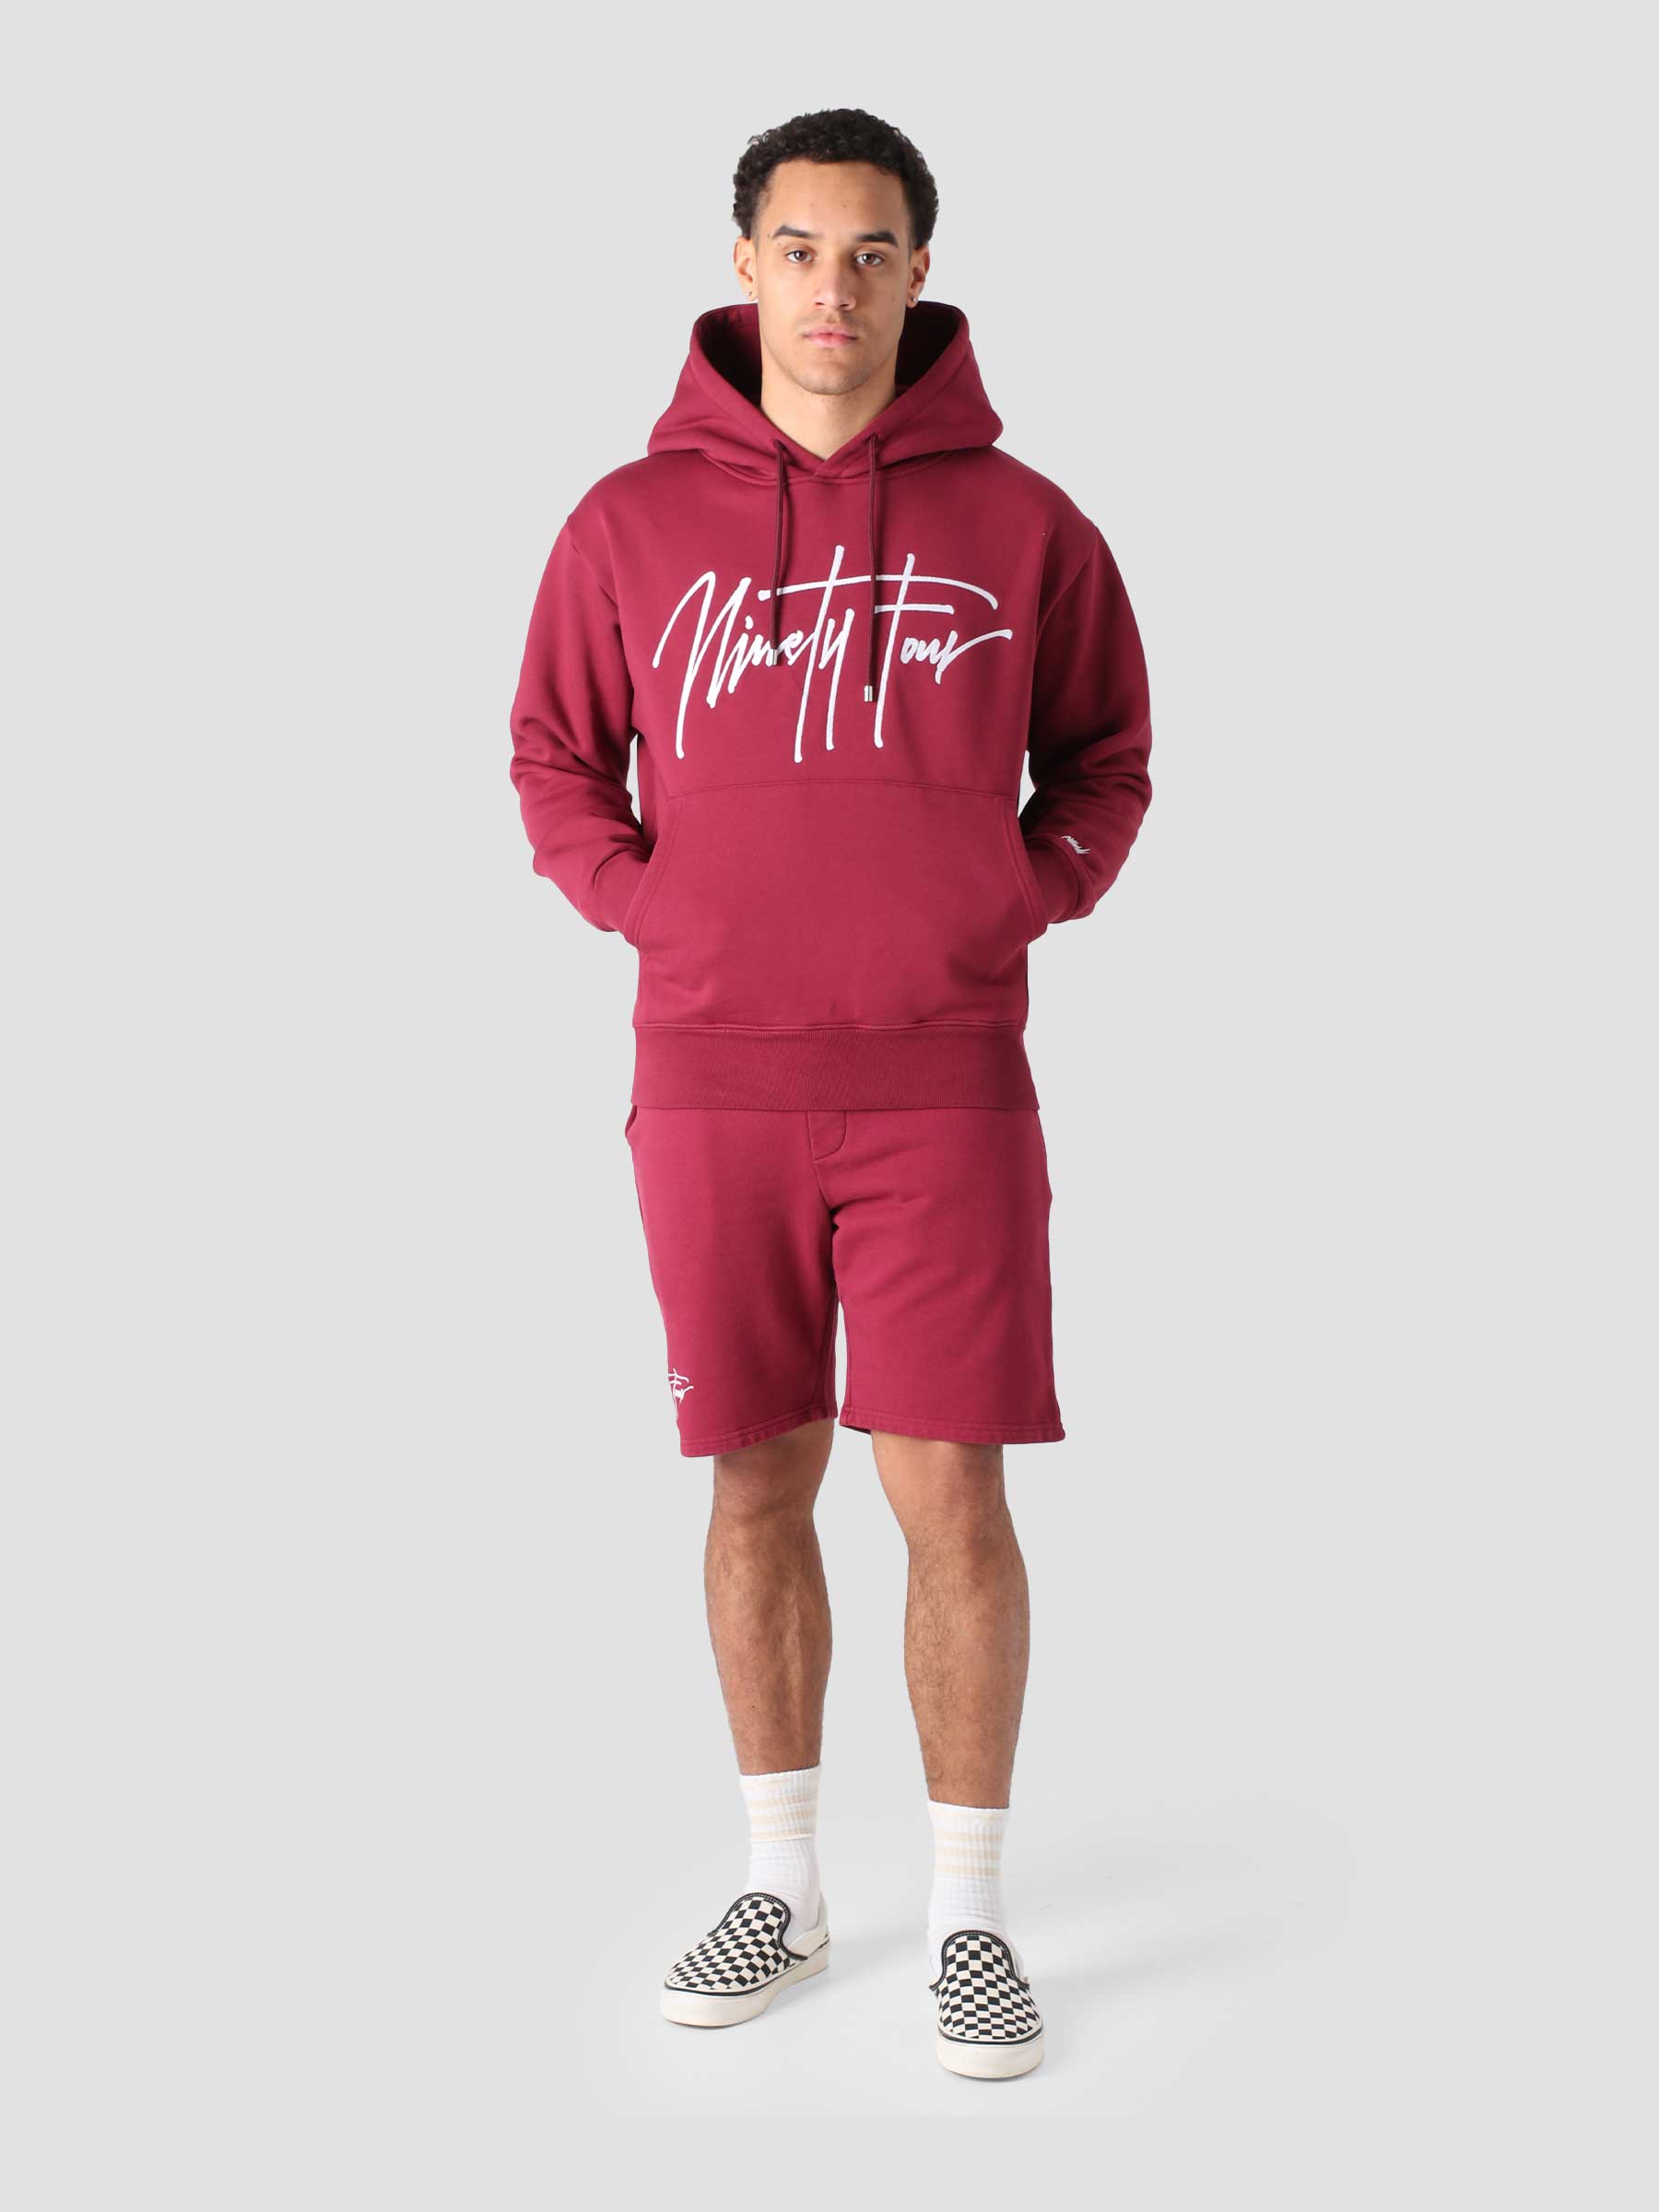 NTF Royals Hoodie Rhododendron